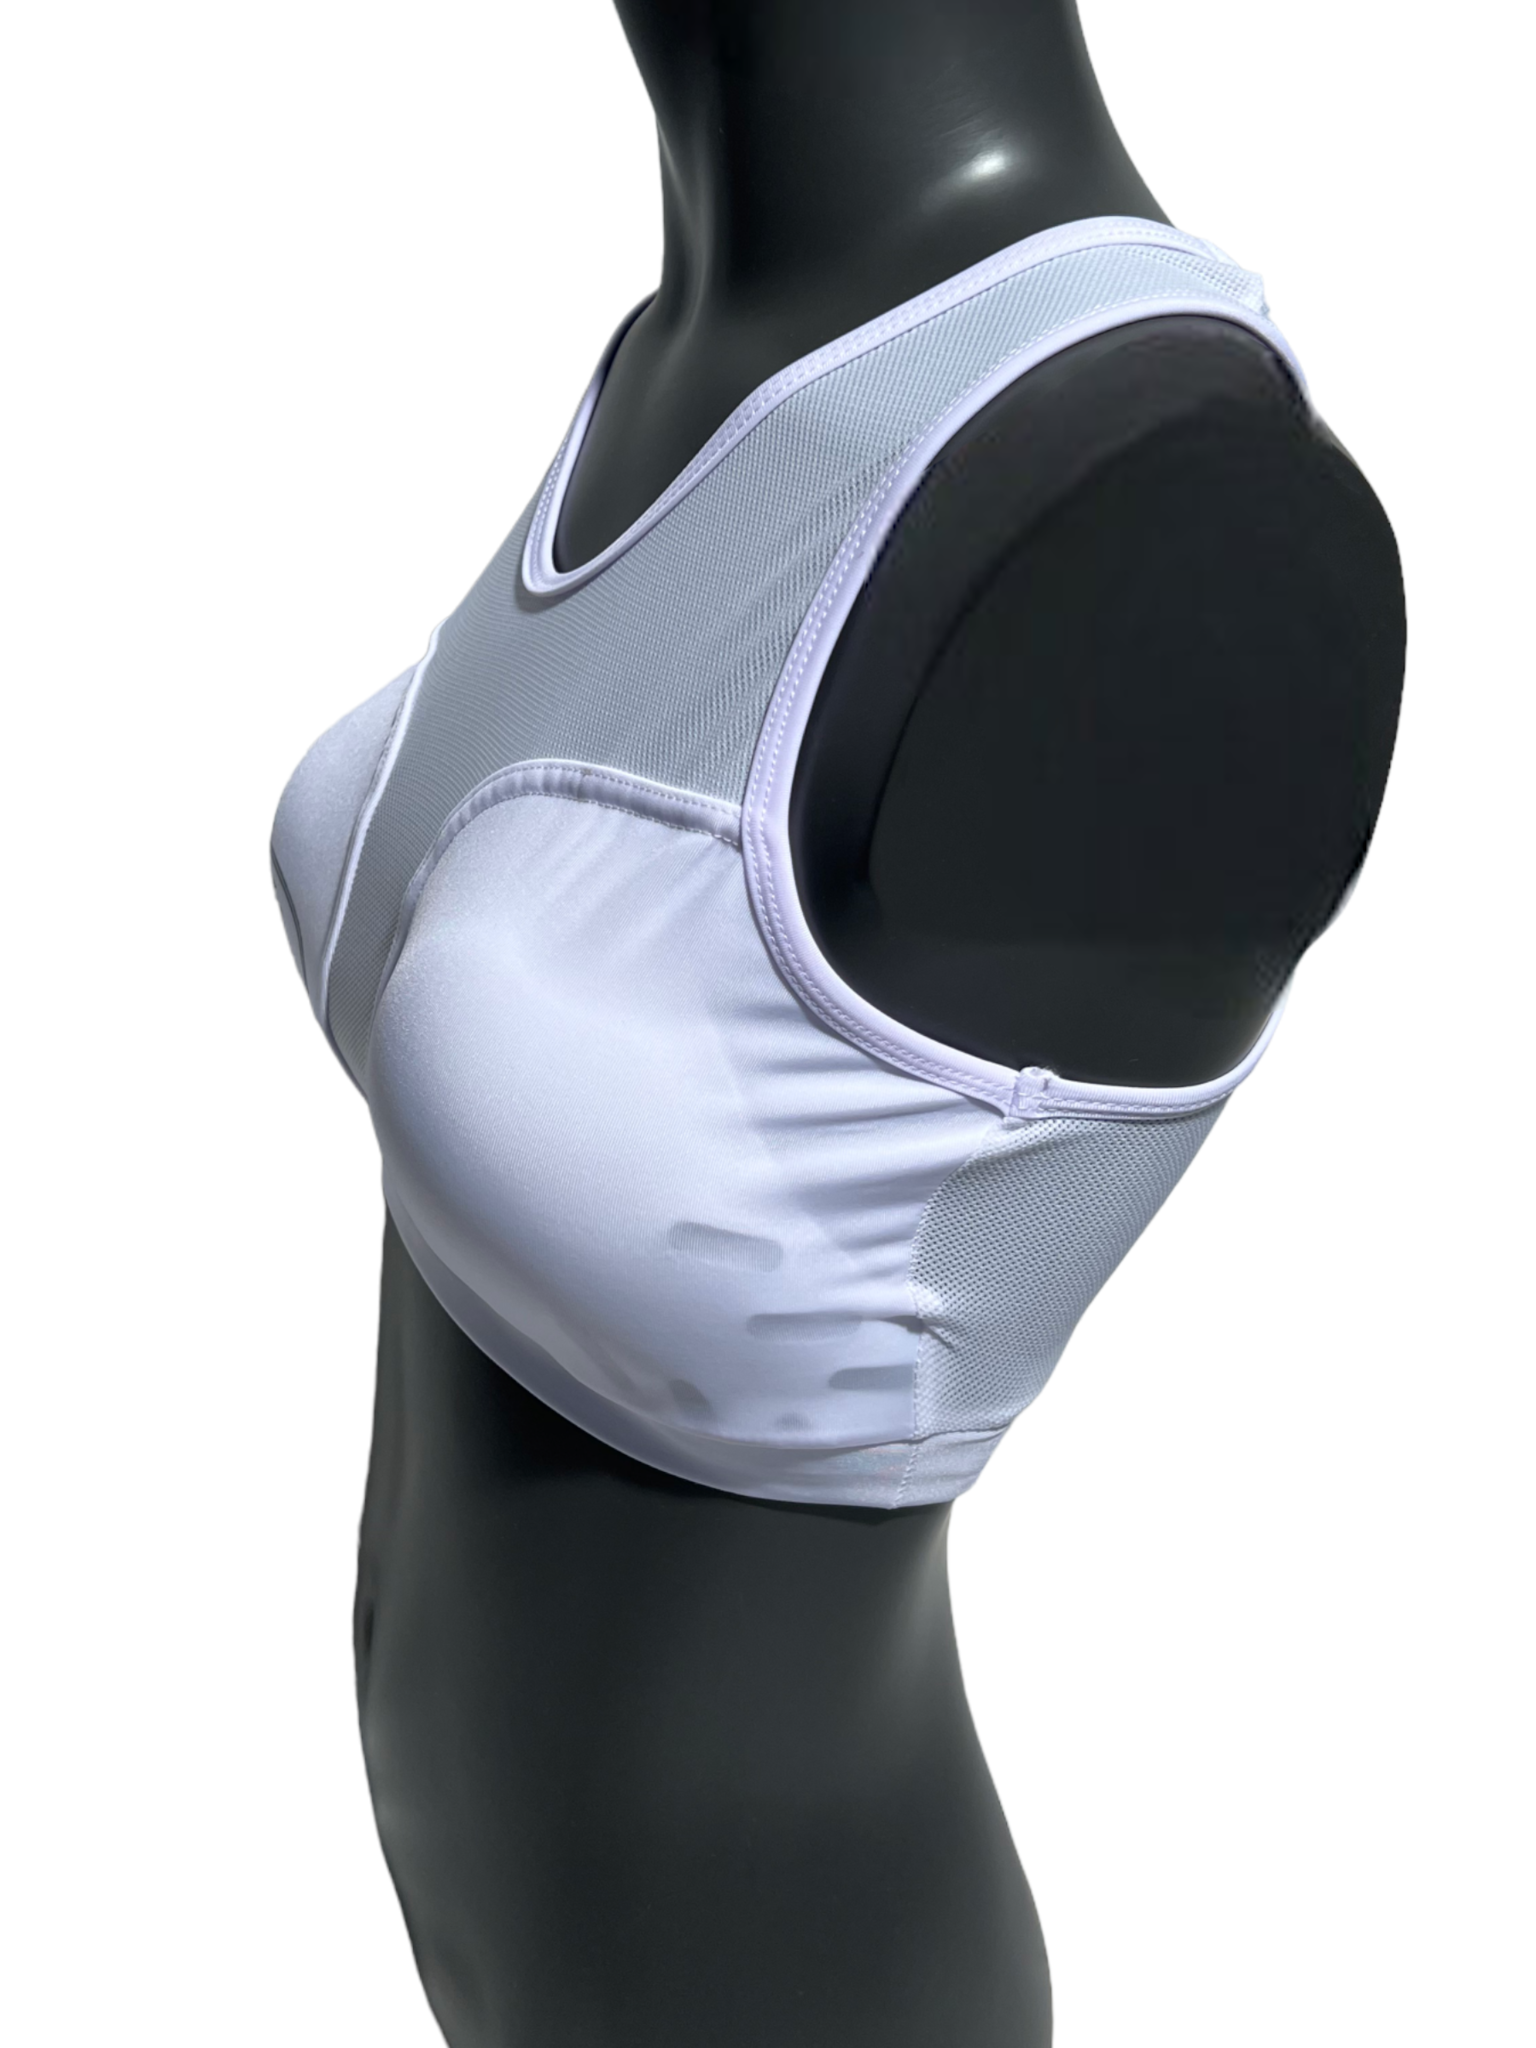 How To Wear A Protective Cup For Sports – Mensuas